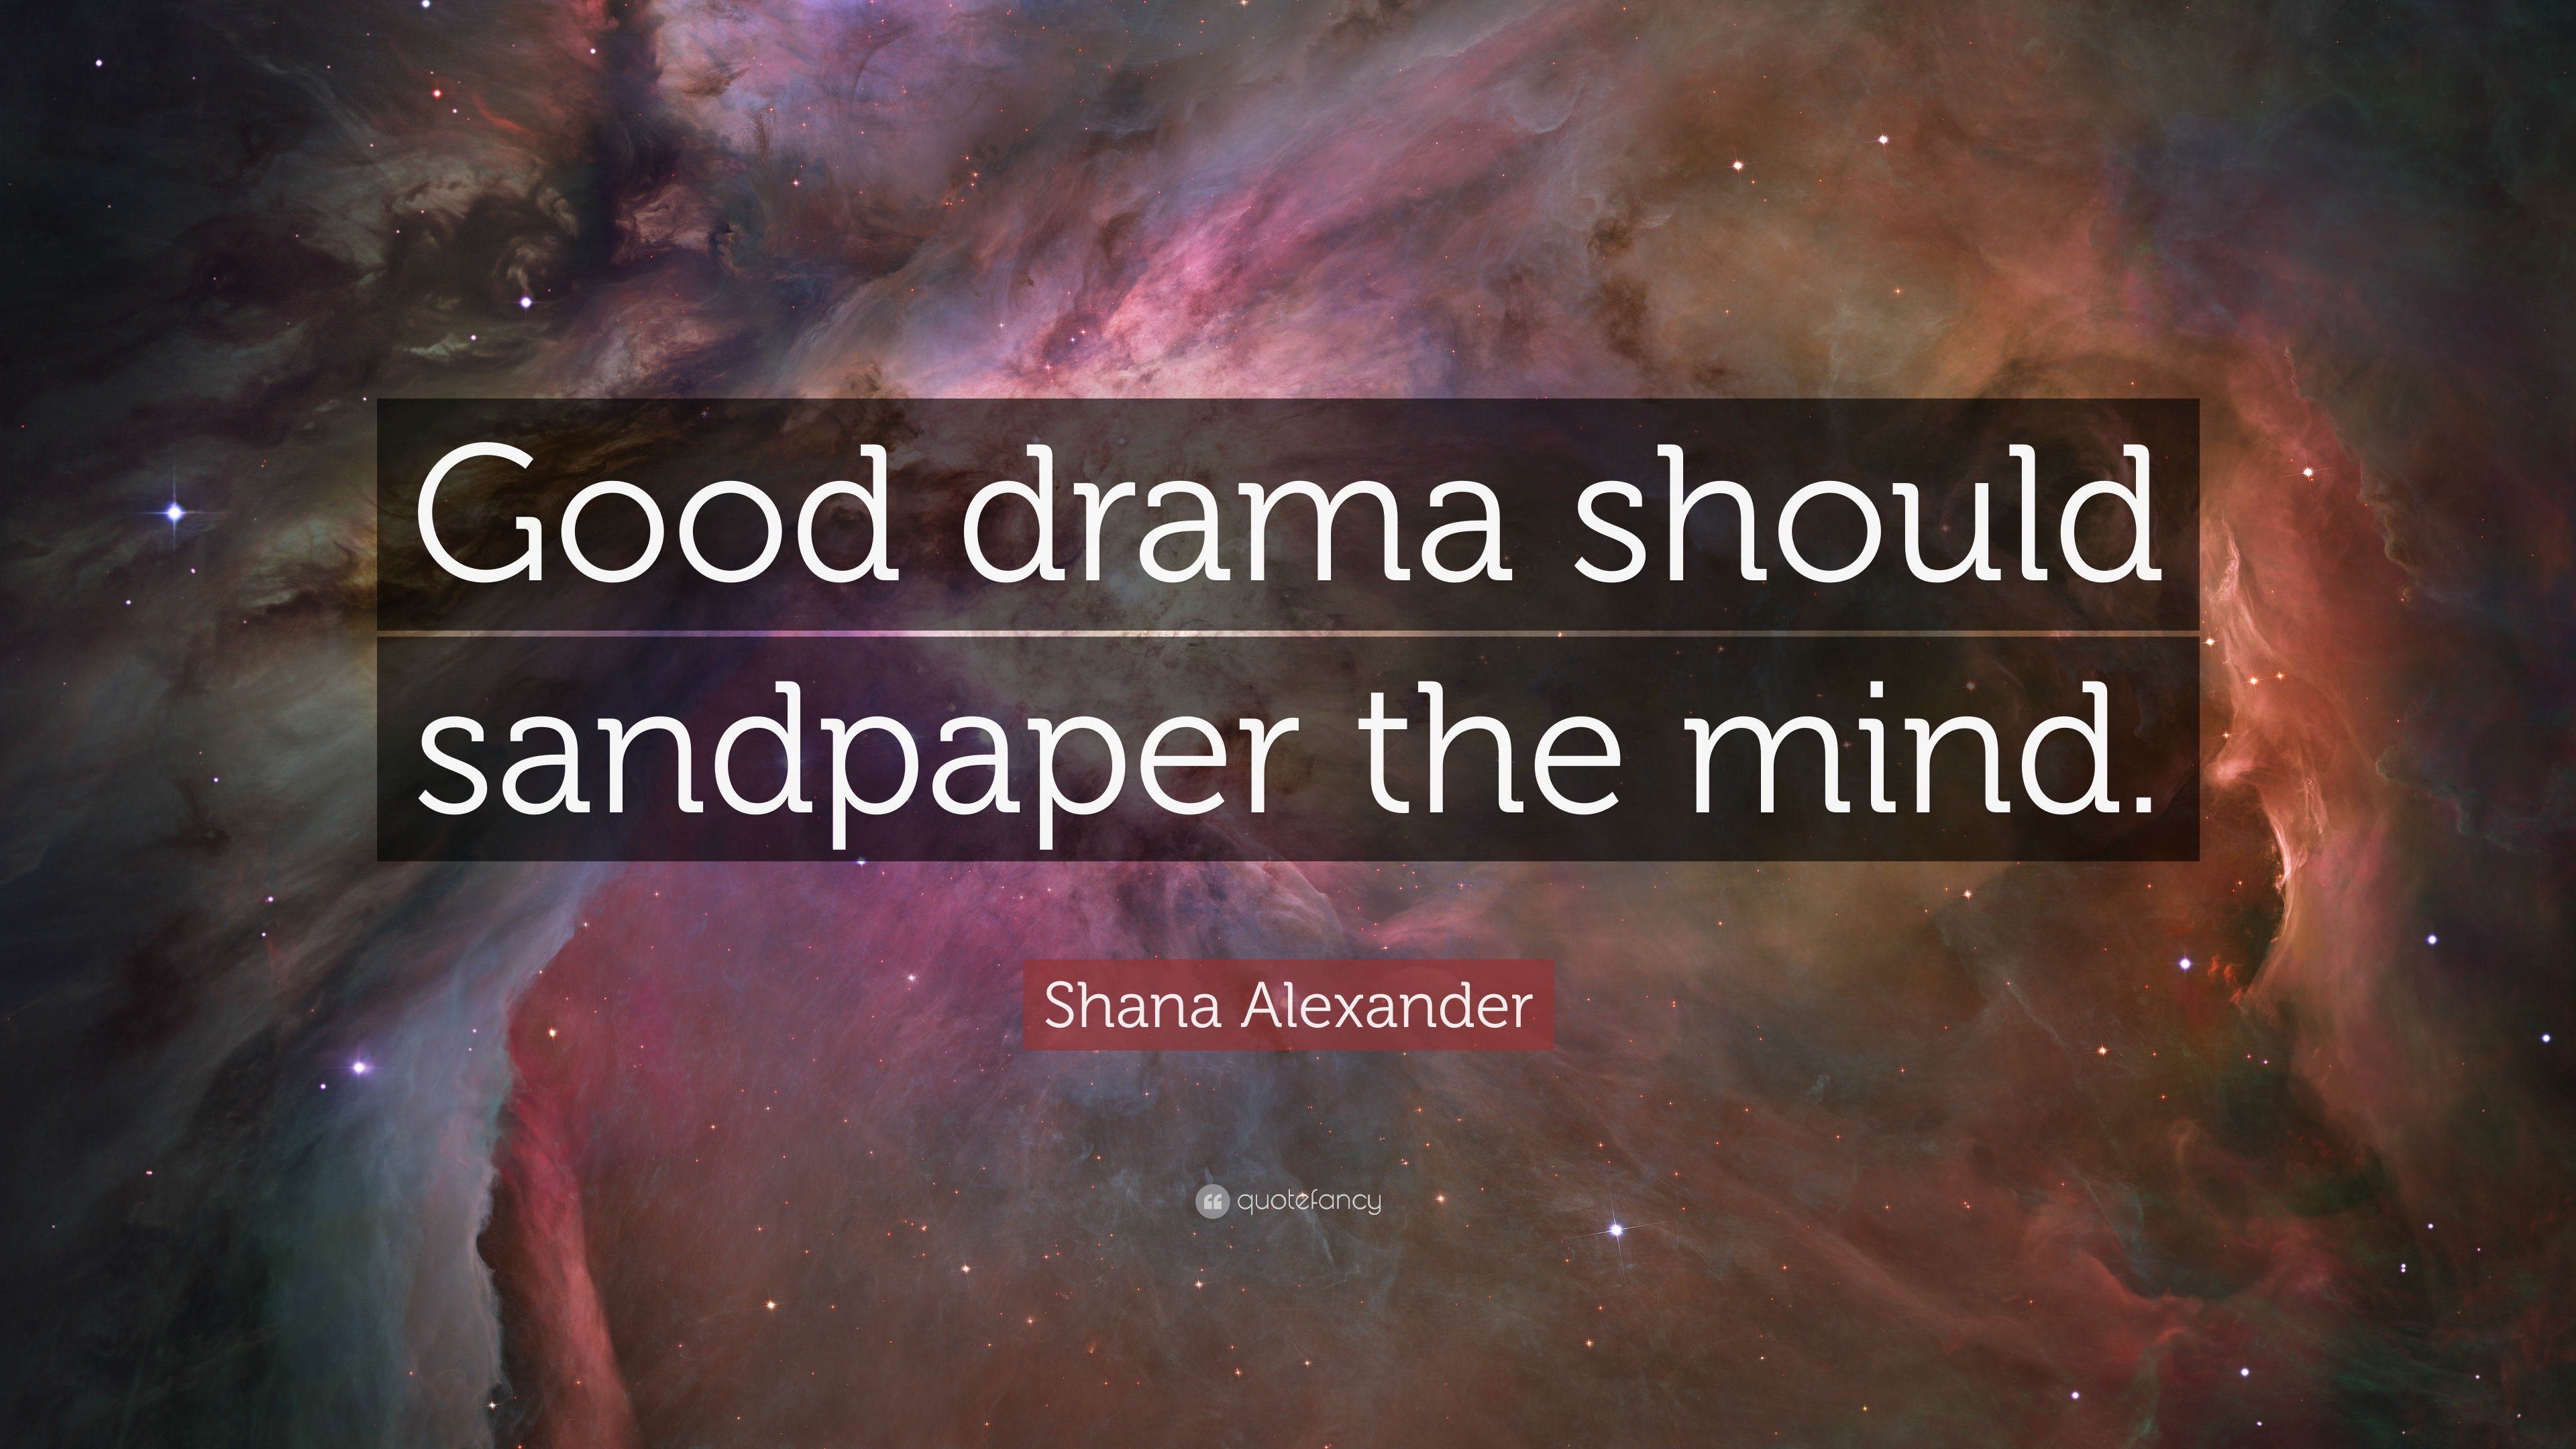 Shana Alexander Quote: “Rumor and gossip, like sound itself, appear to  travel by wave-effect, sheer